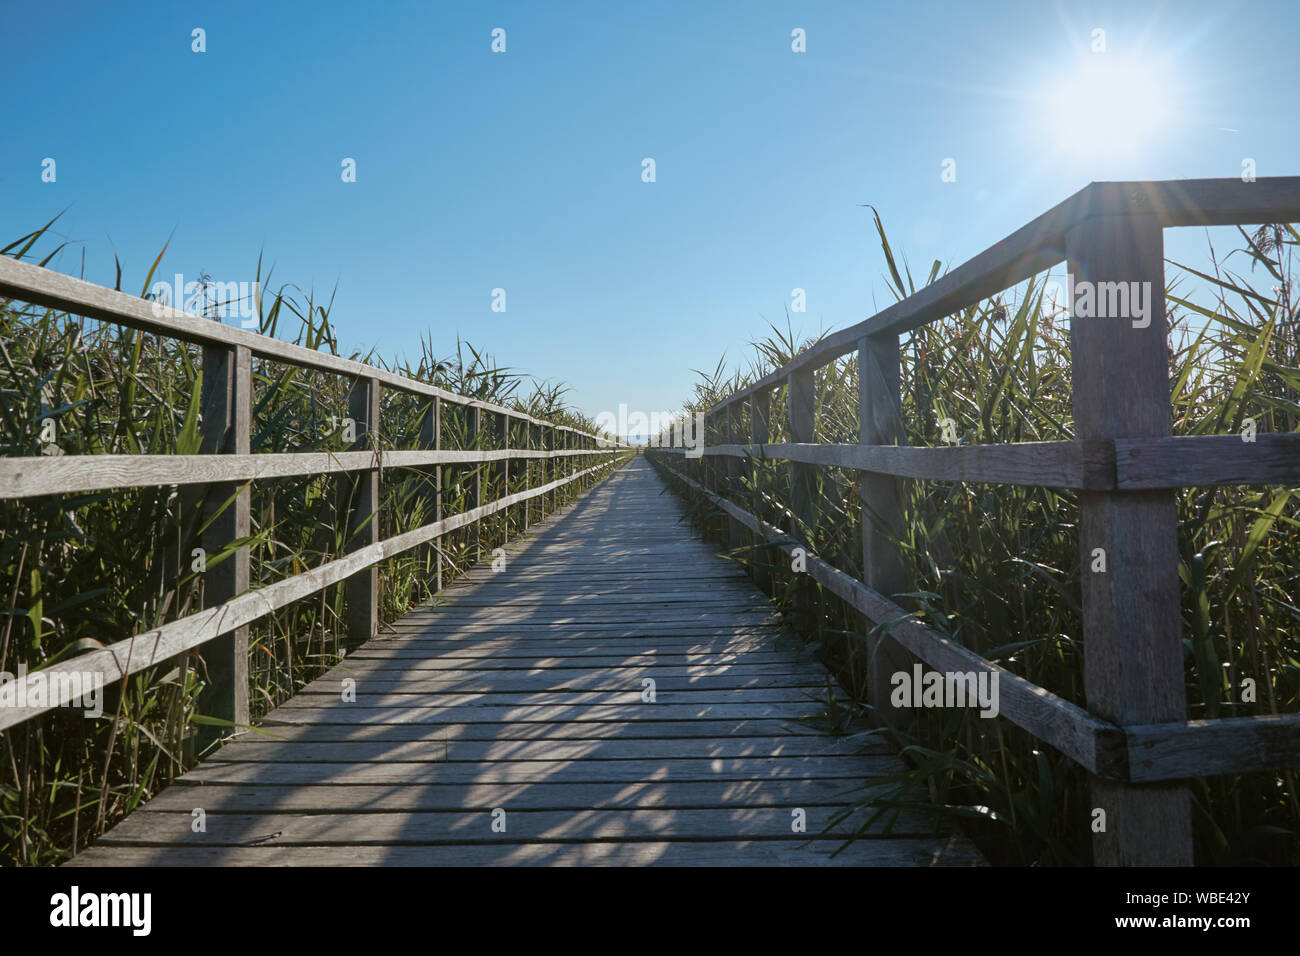 Wooden boardwalk and nature at Unesco world heritage Federsee in Bad Buchau, Germany - August 2019 Stock Photo